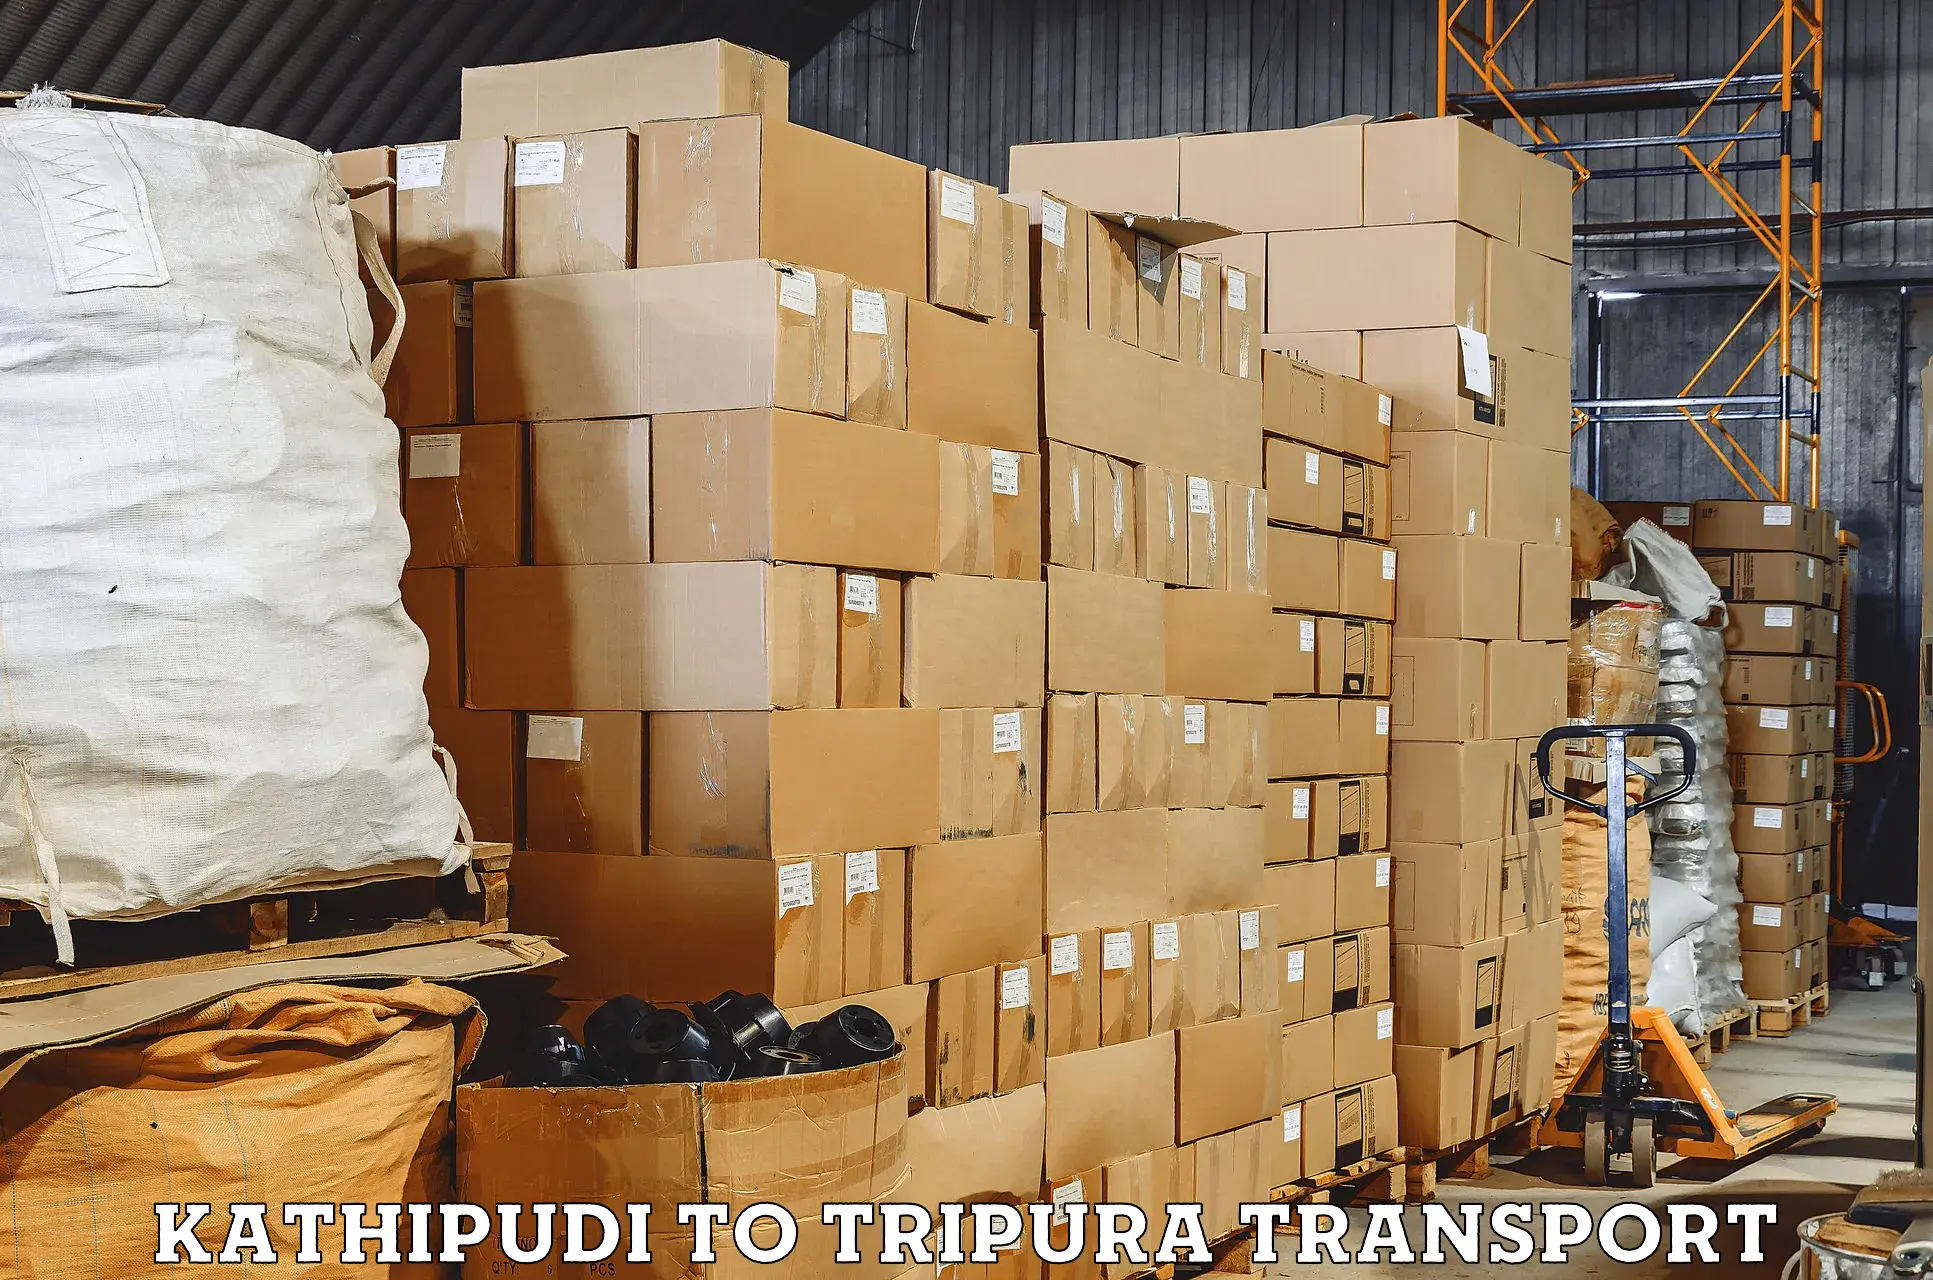 Transport bike from one state to another Kathipudi to North Tripura